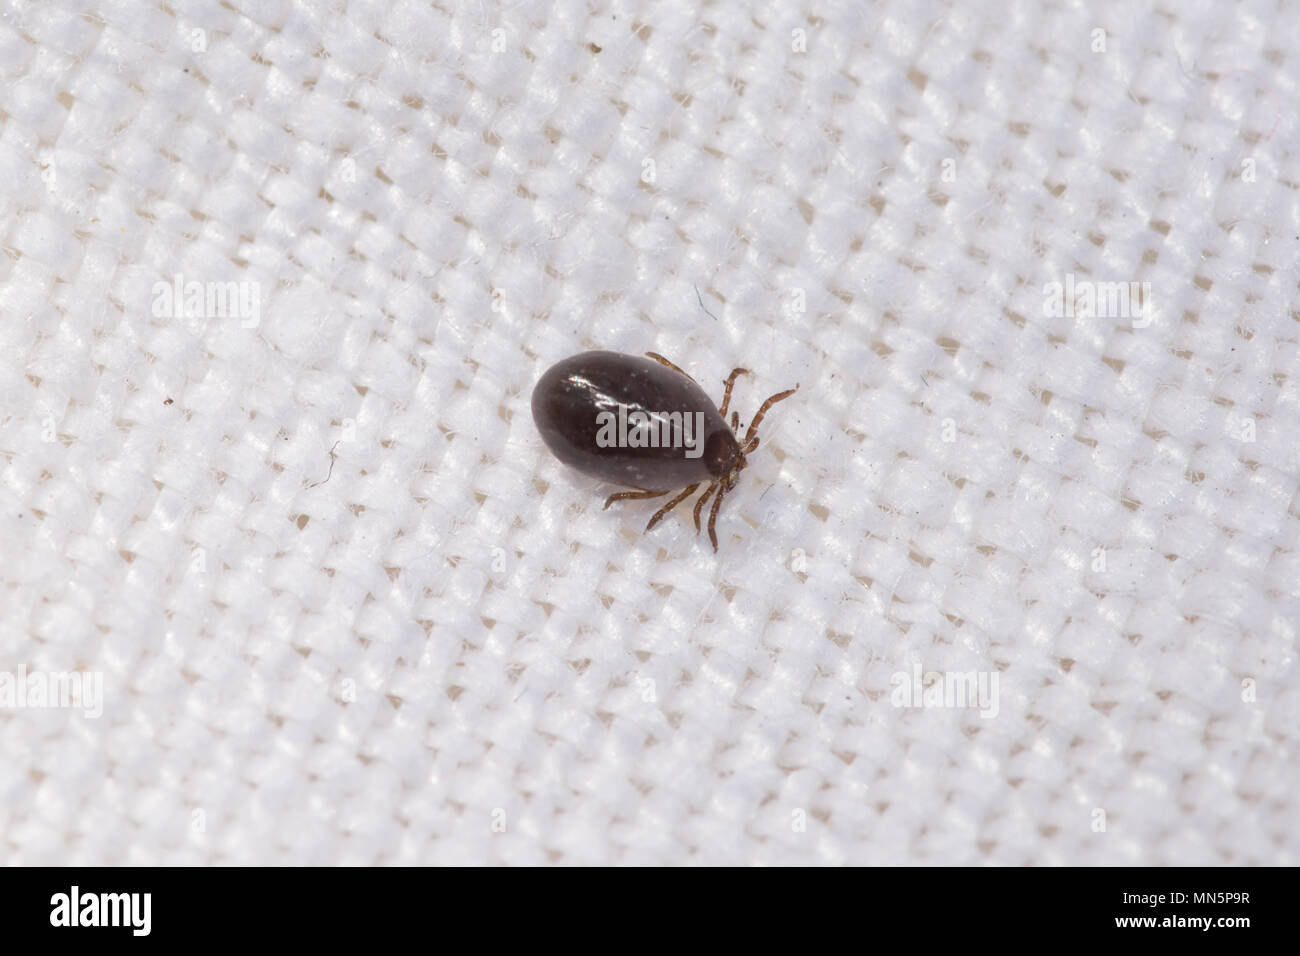 A parasitic tick on a white background. These arachnids can carry diseases such as lyme disease, which they transmit when they bite. Stock Photo